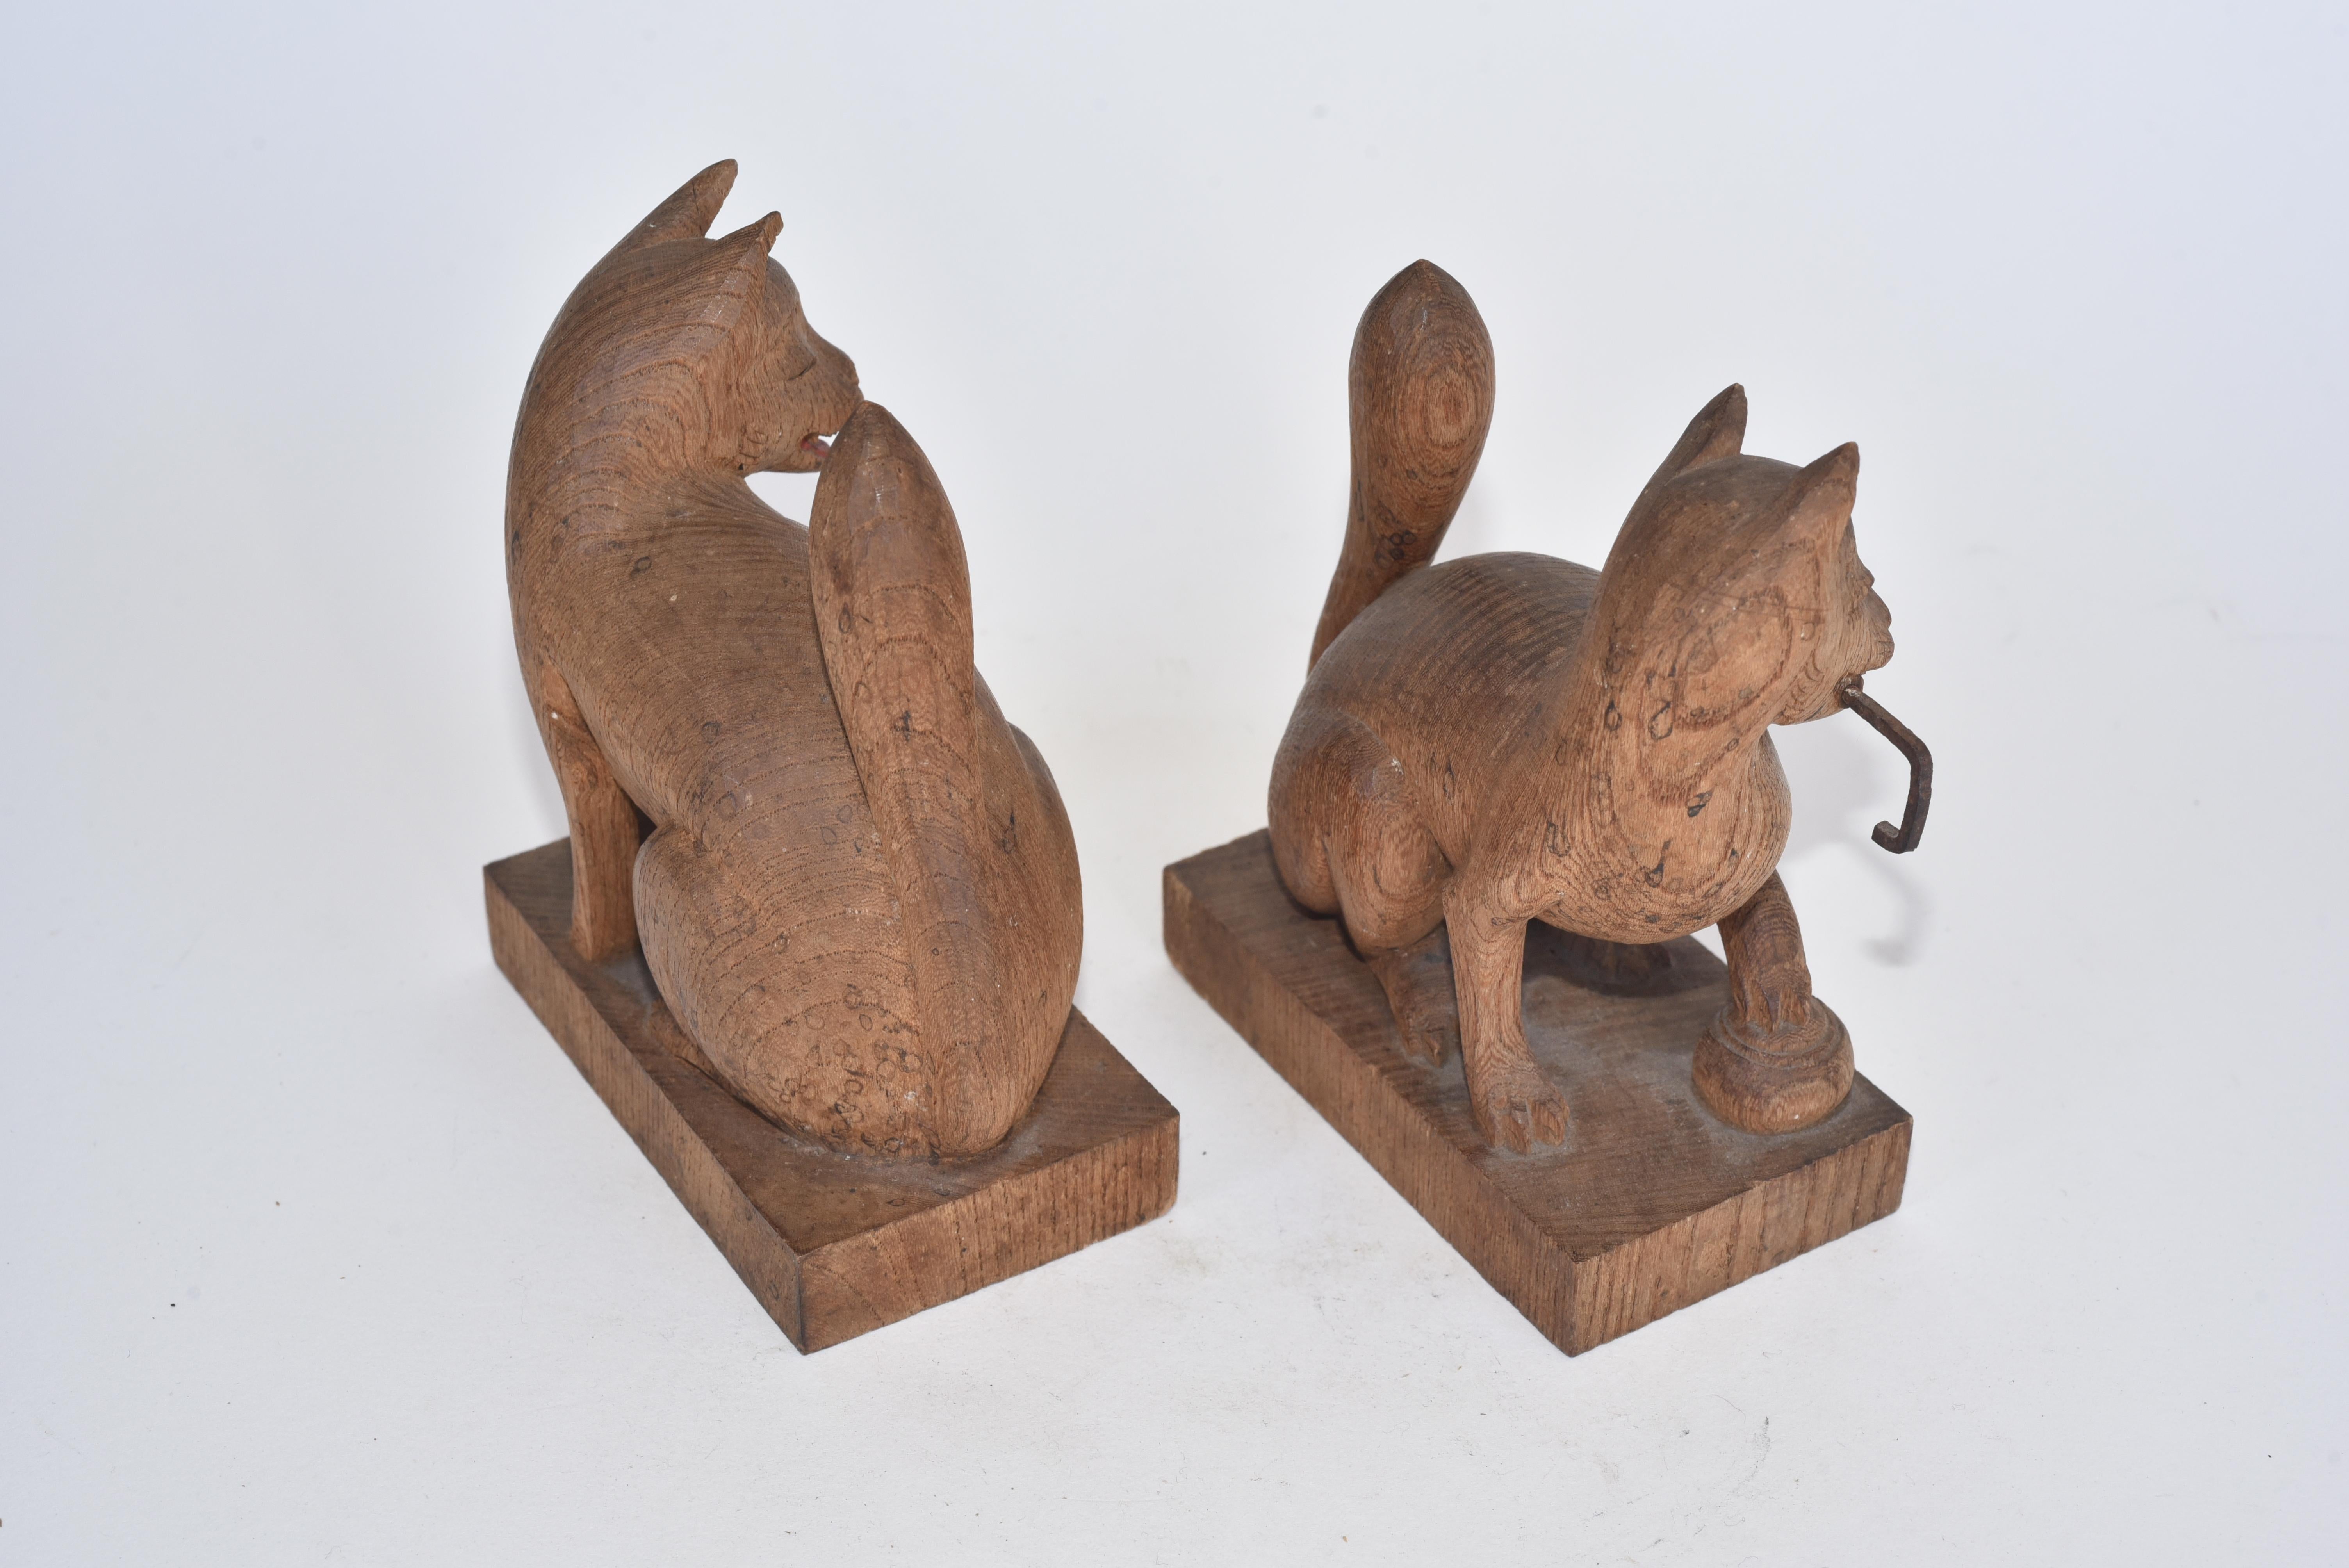 Hand-Carved Pair of Japanese Miniature Wooden Foxes, Inari Shrine Guardians, 19th Century